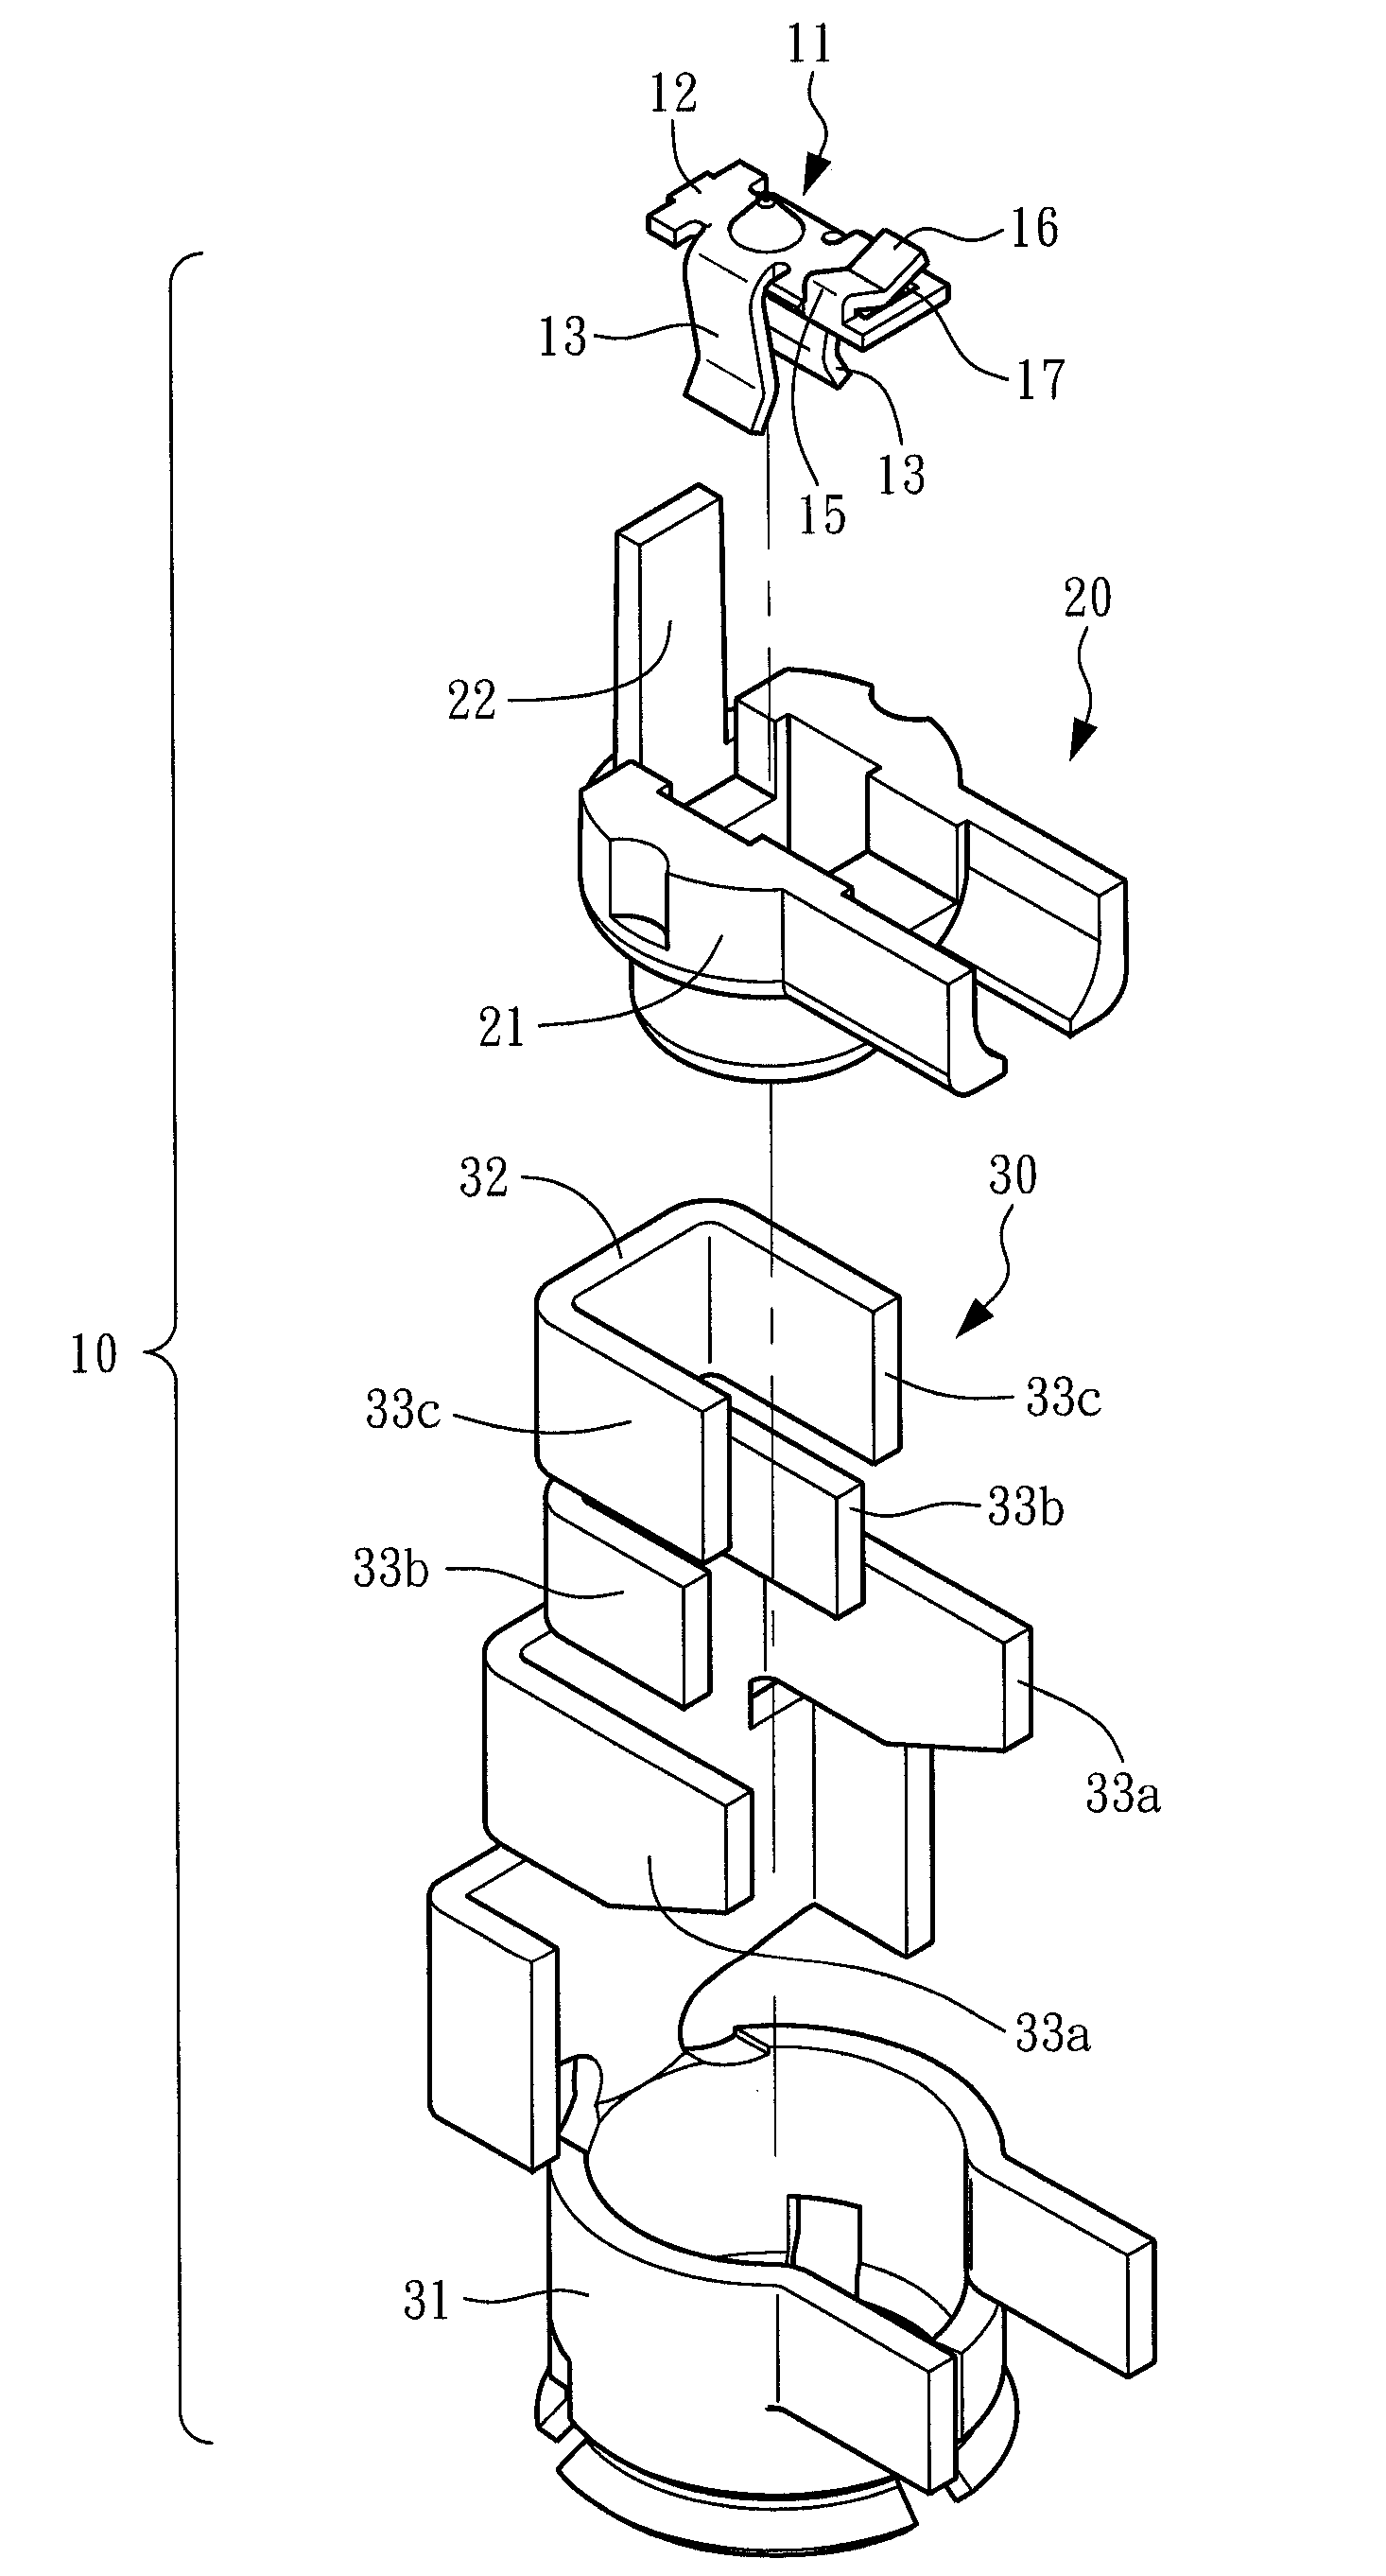 Coaxial cable connector with a connection terminal having a resilient tongue section